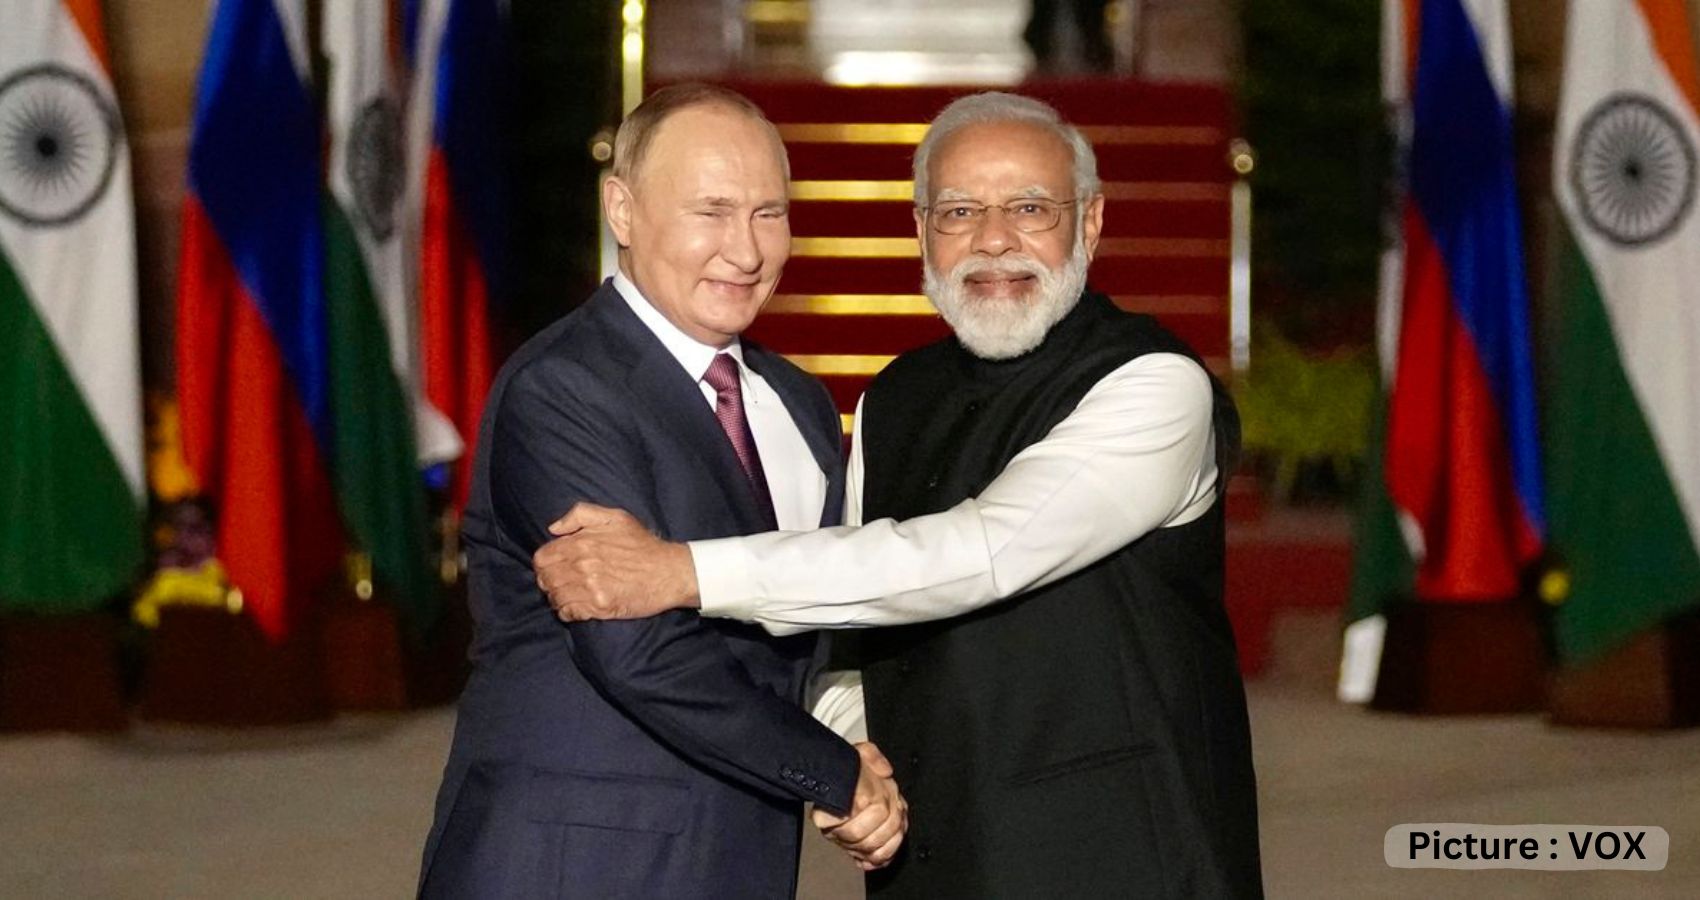 Why Has India Not Condemned Russia’s Invasion of Ukraine?